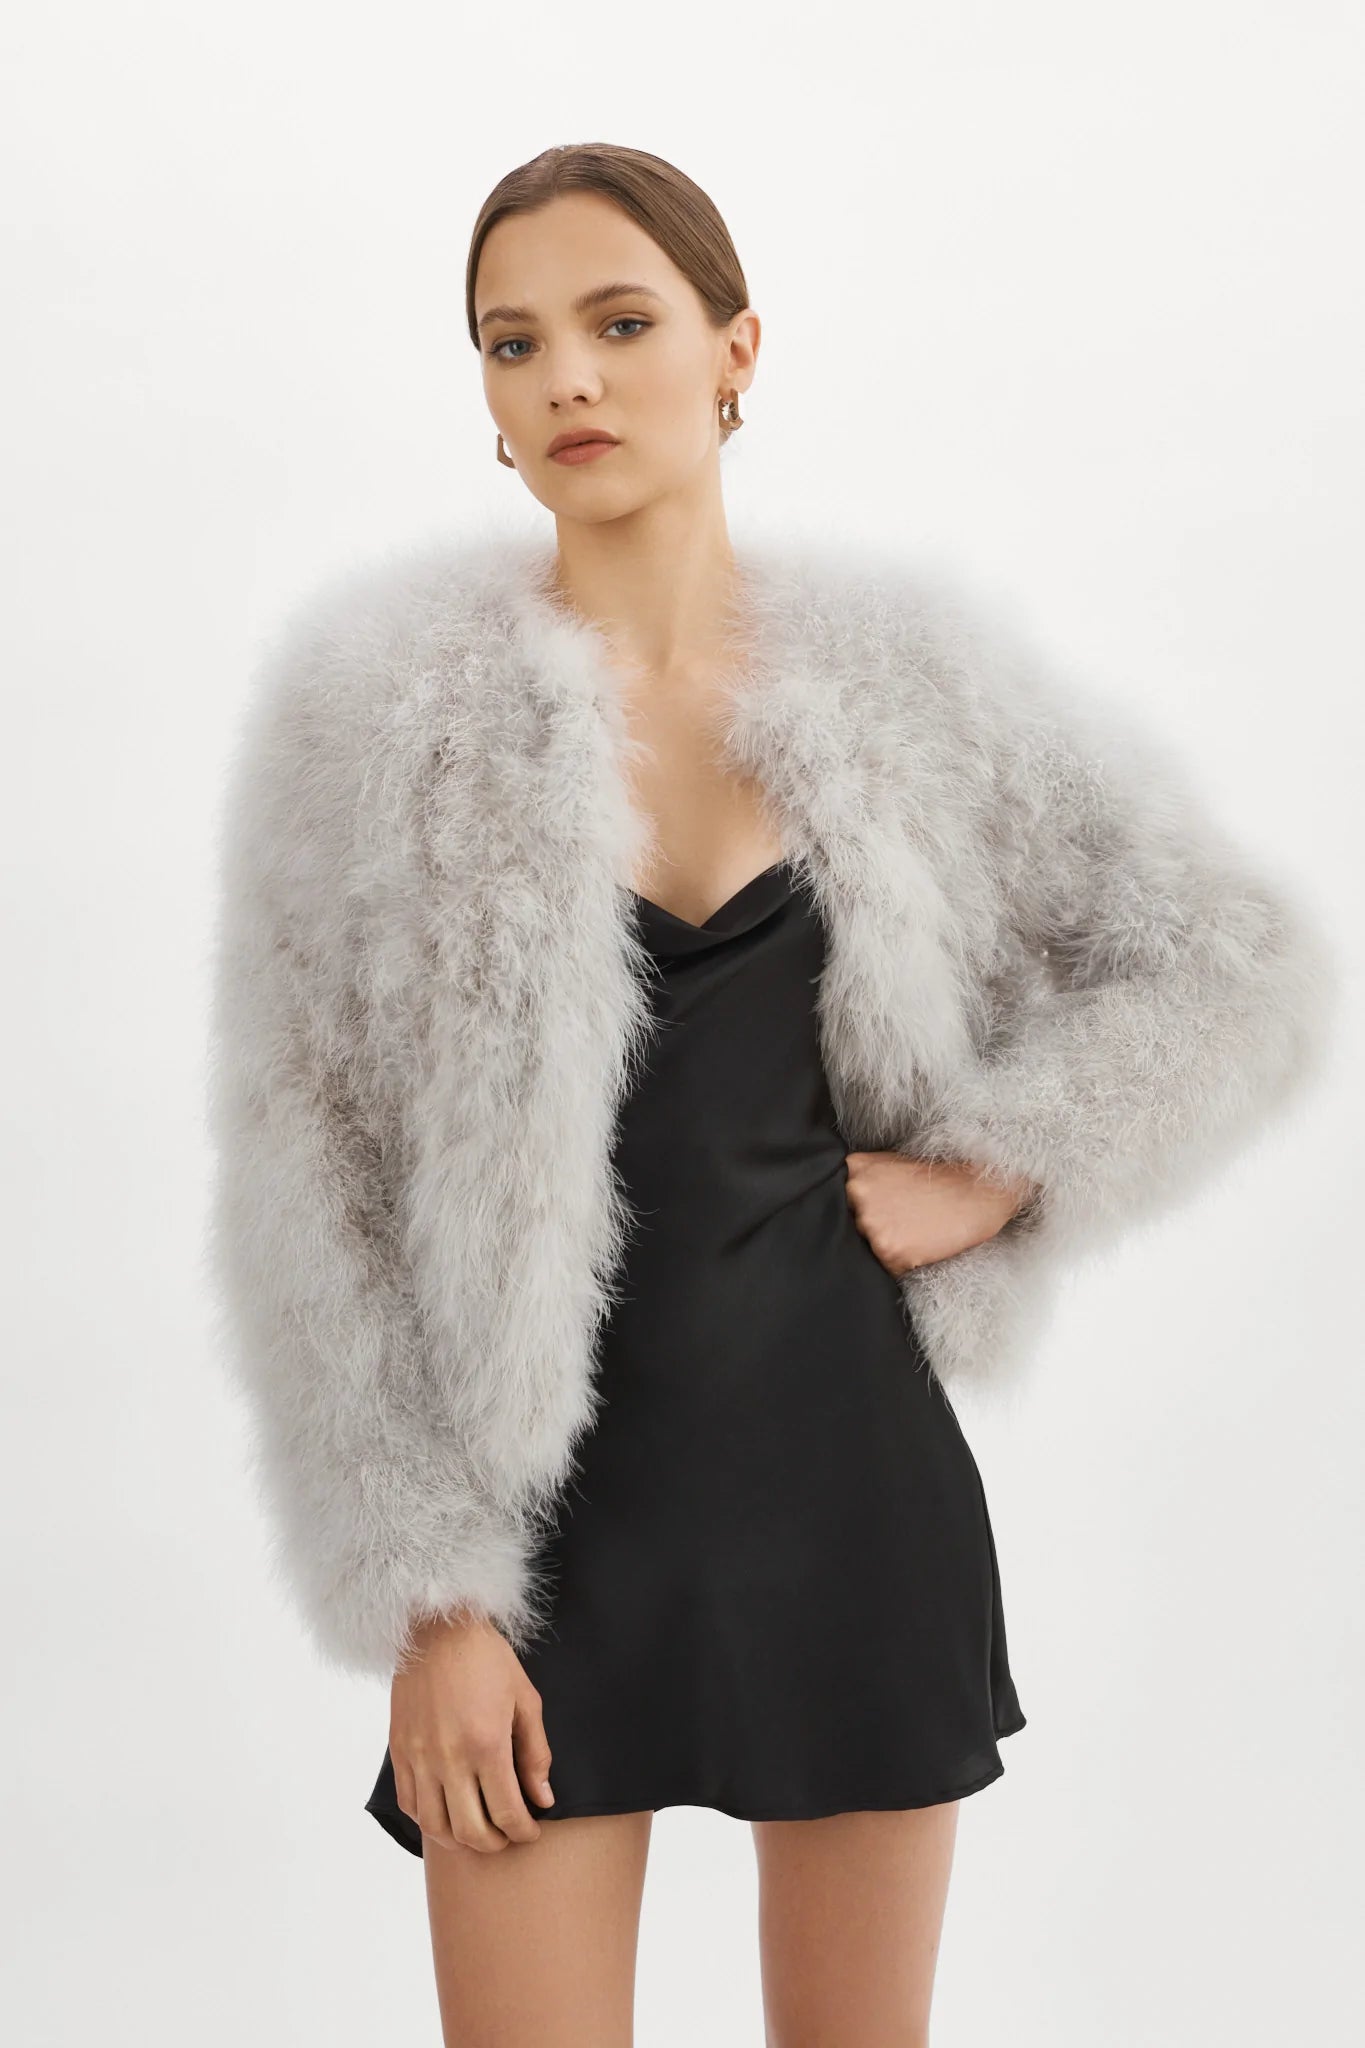 LAMARQUE Deora Feather Jacket in Light Grey